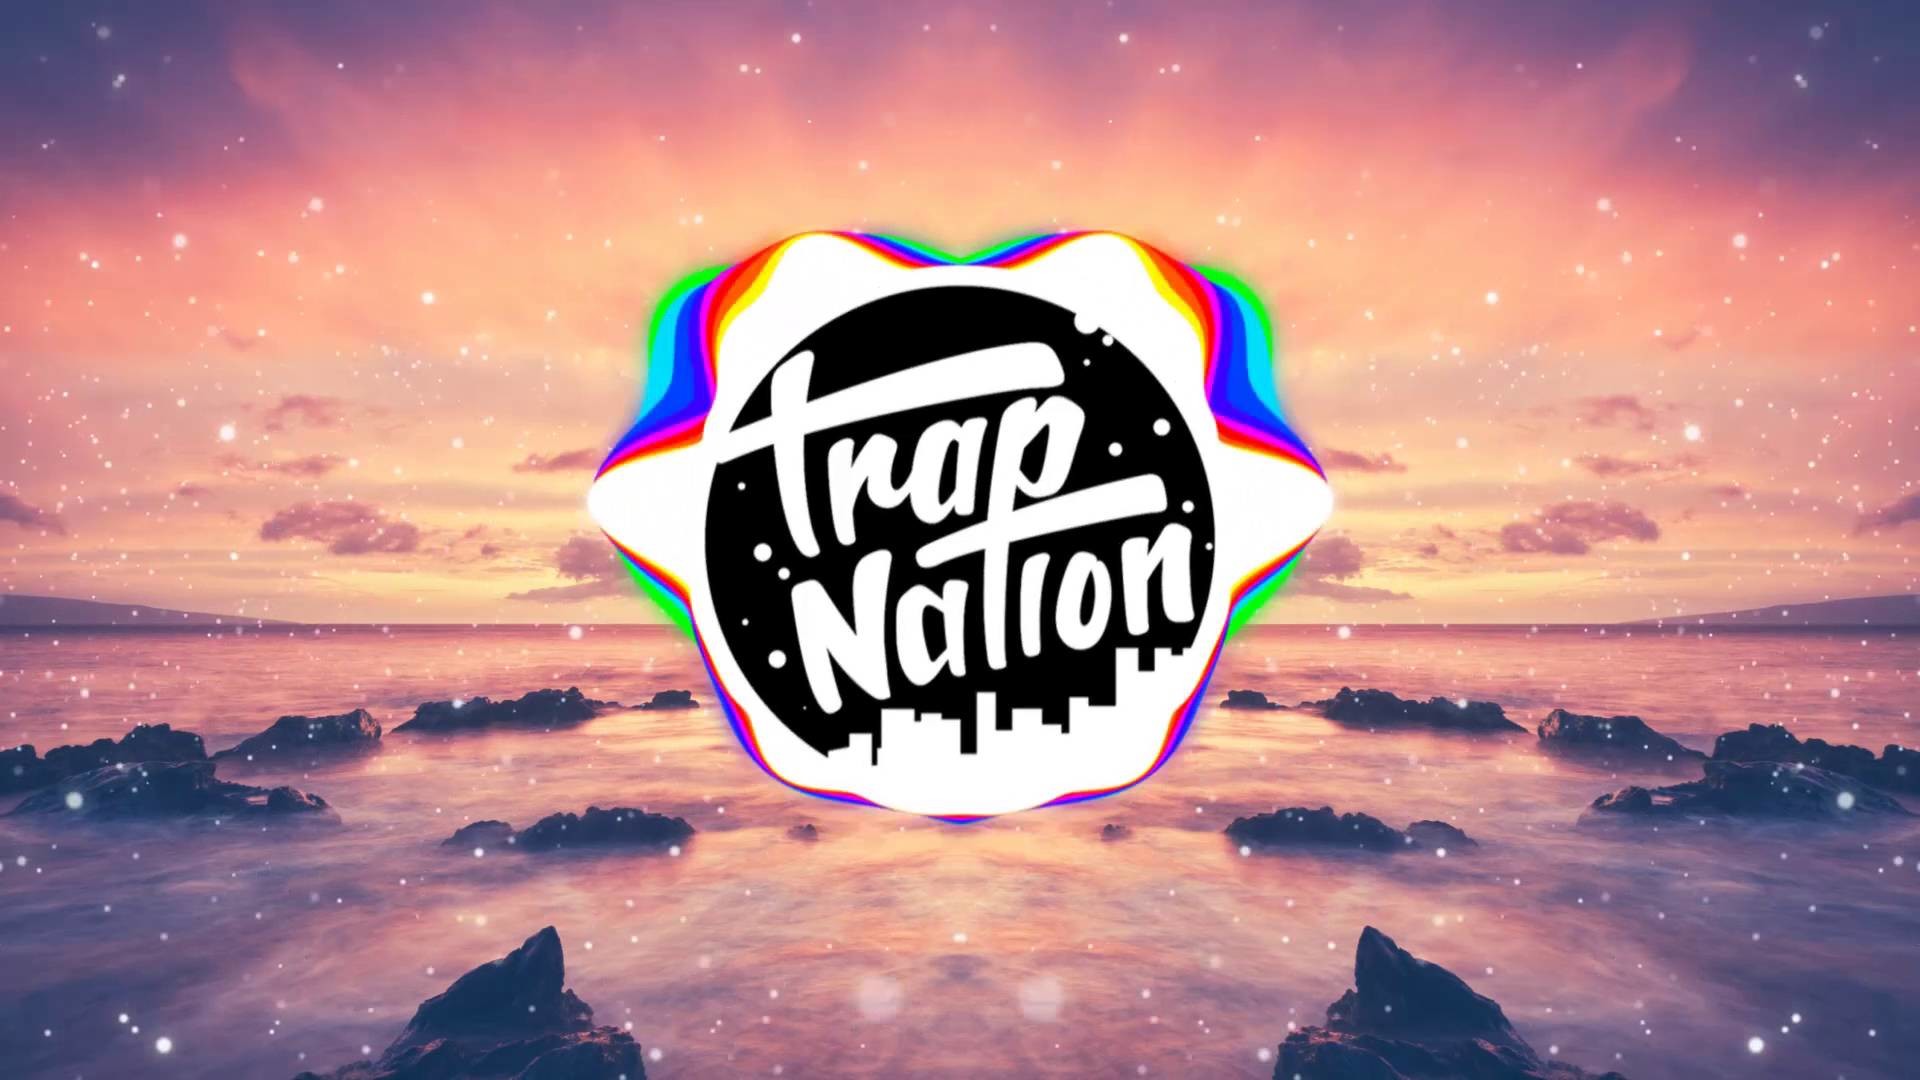 Trap Nation Wallpapers.